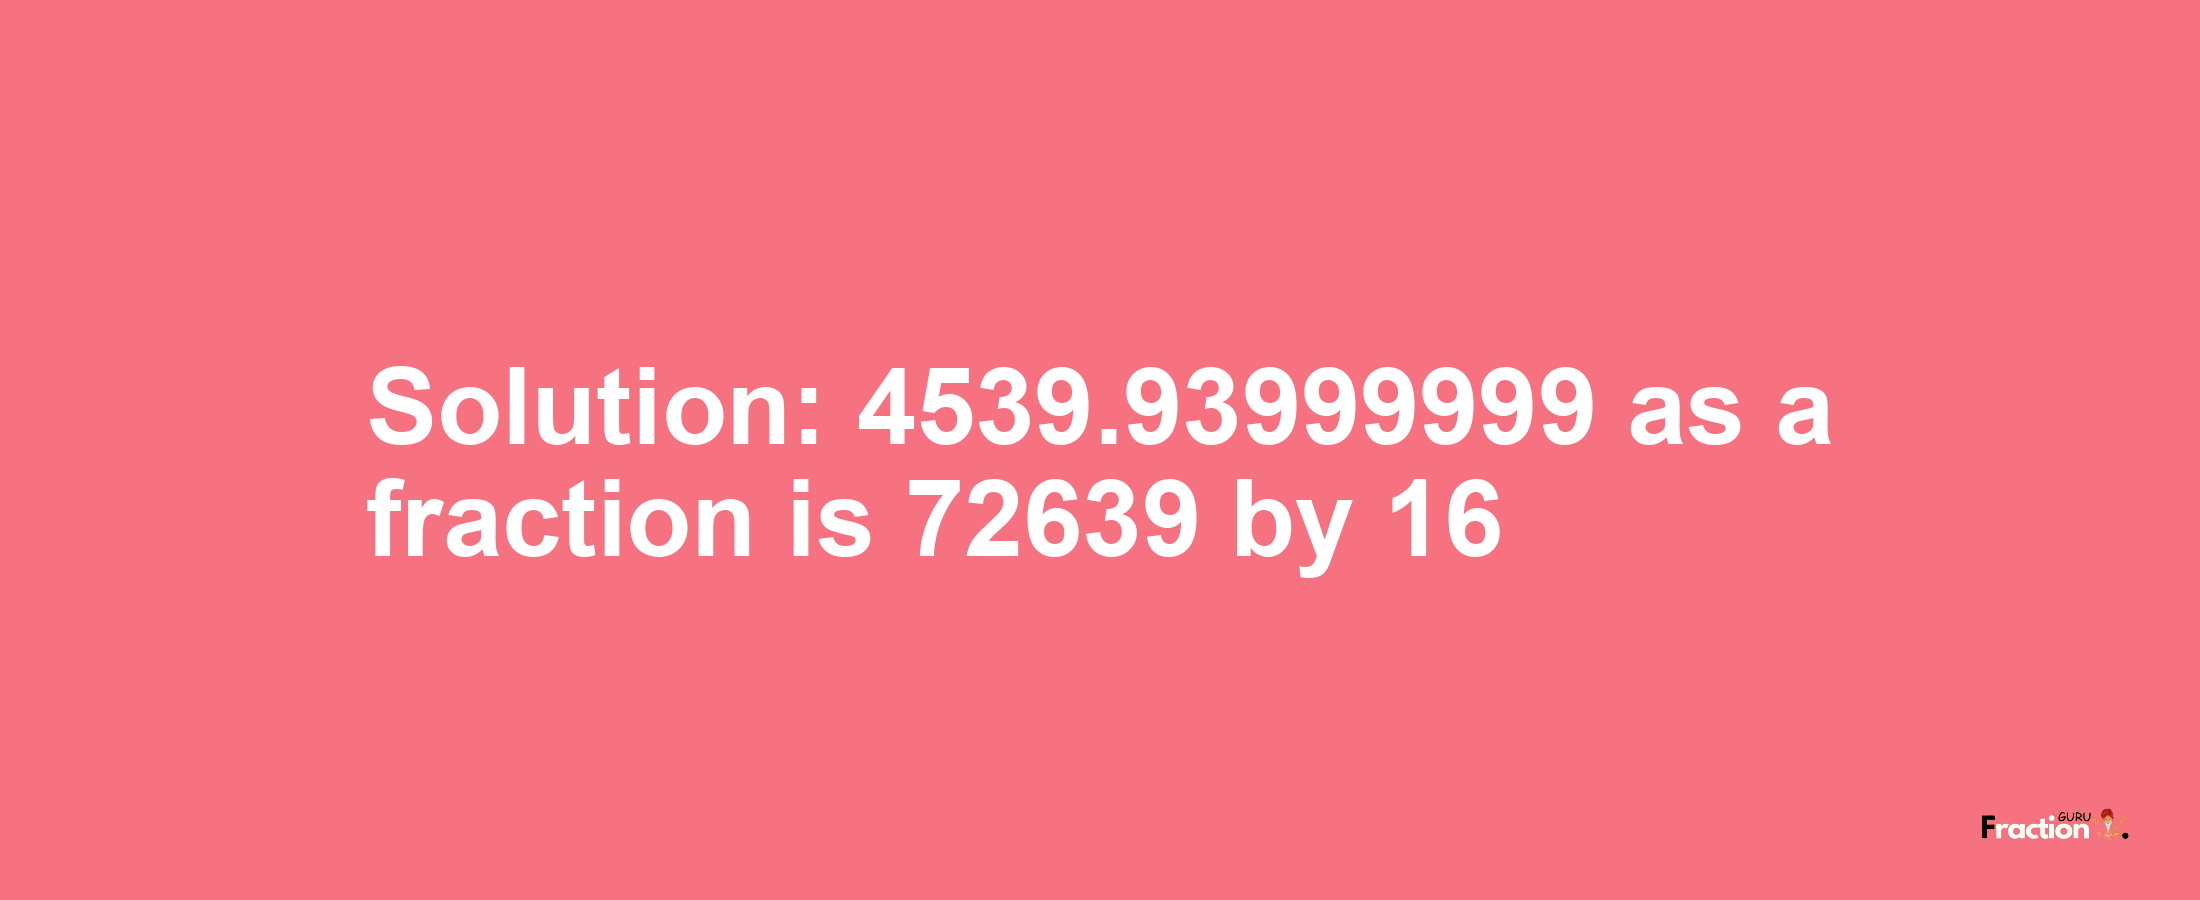 Solution:4539.93999999 as a fraction is 72639/16